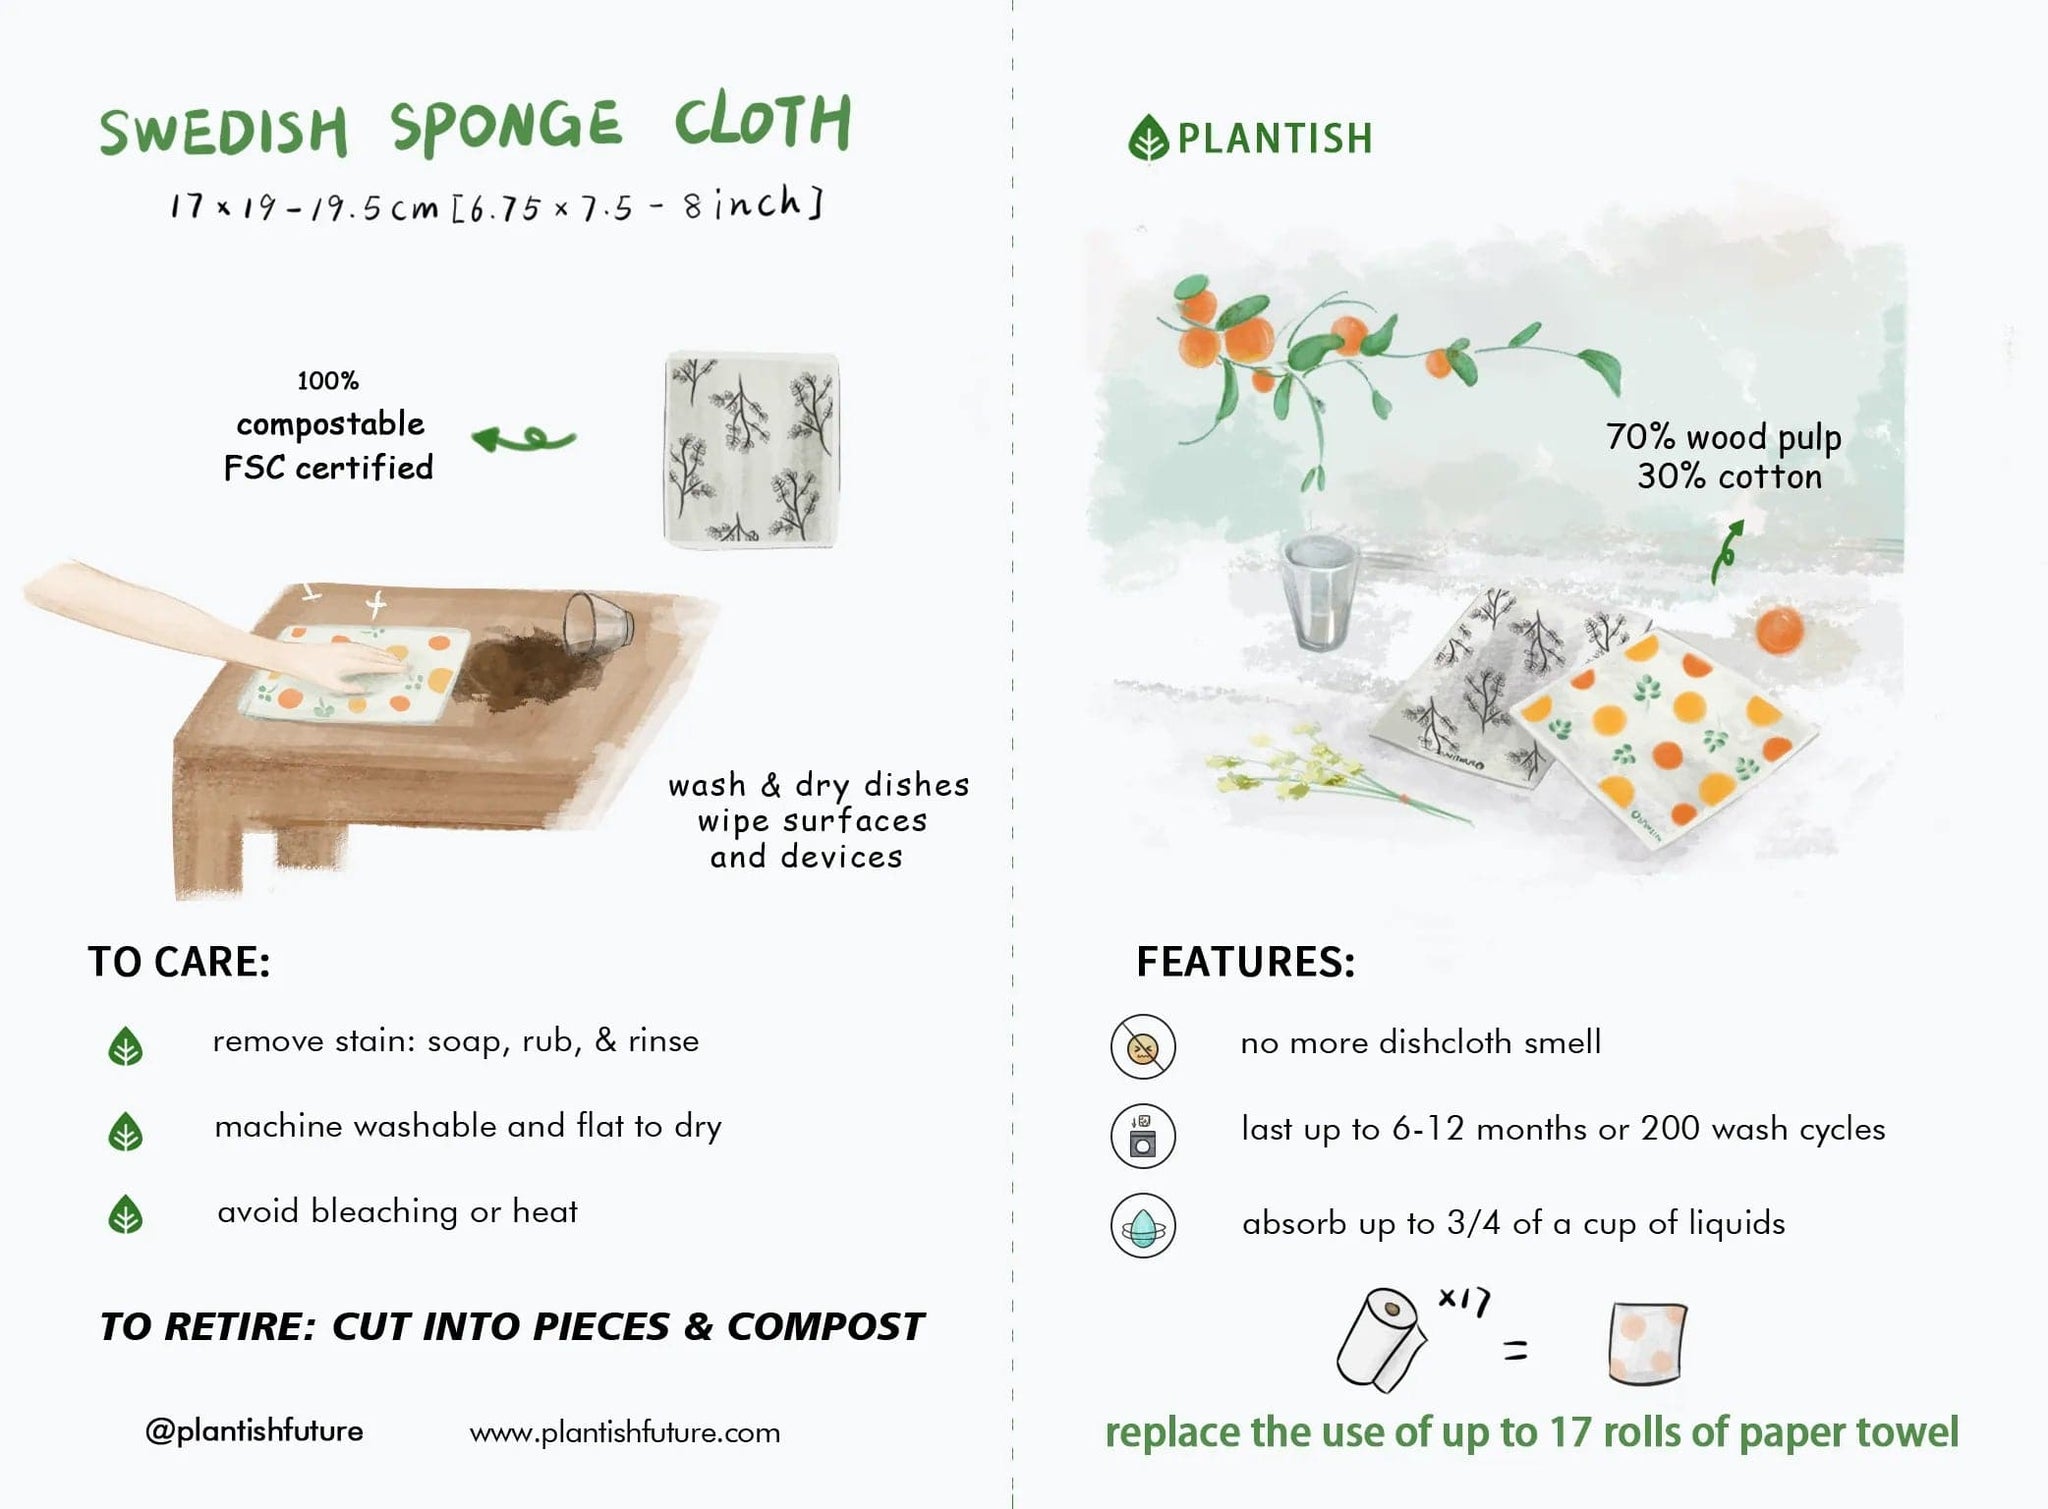 Care tips infographic for Swedish sponge cloths. Eco friendly and plastic free.